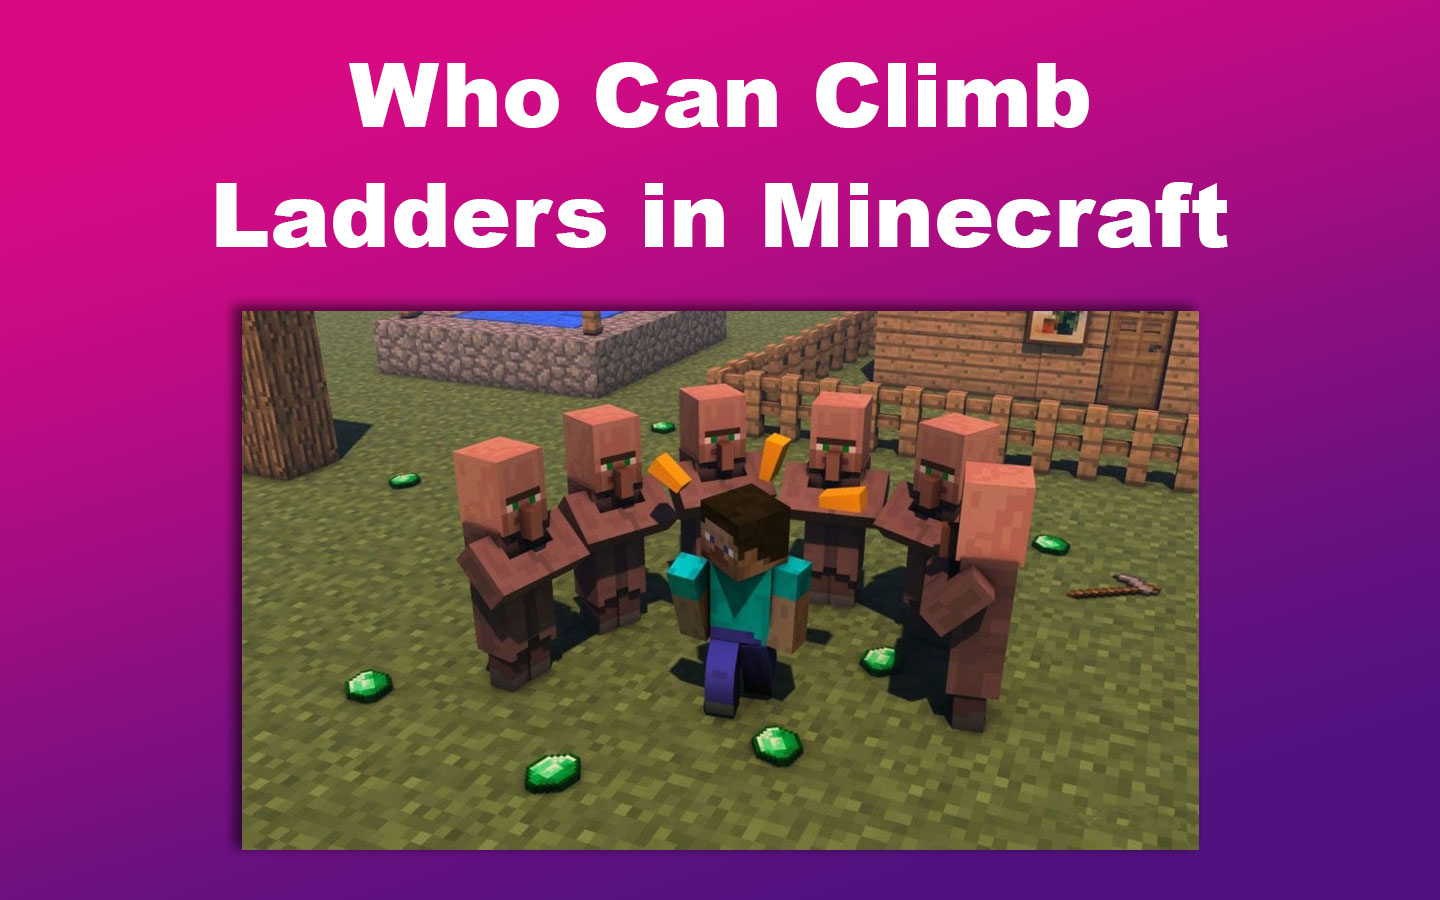 Who Can Climb Ladders in Minecraft